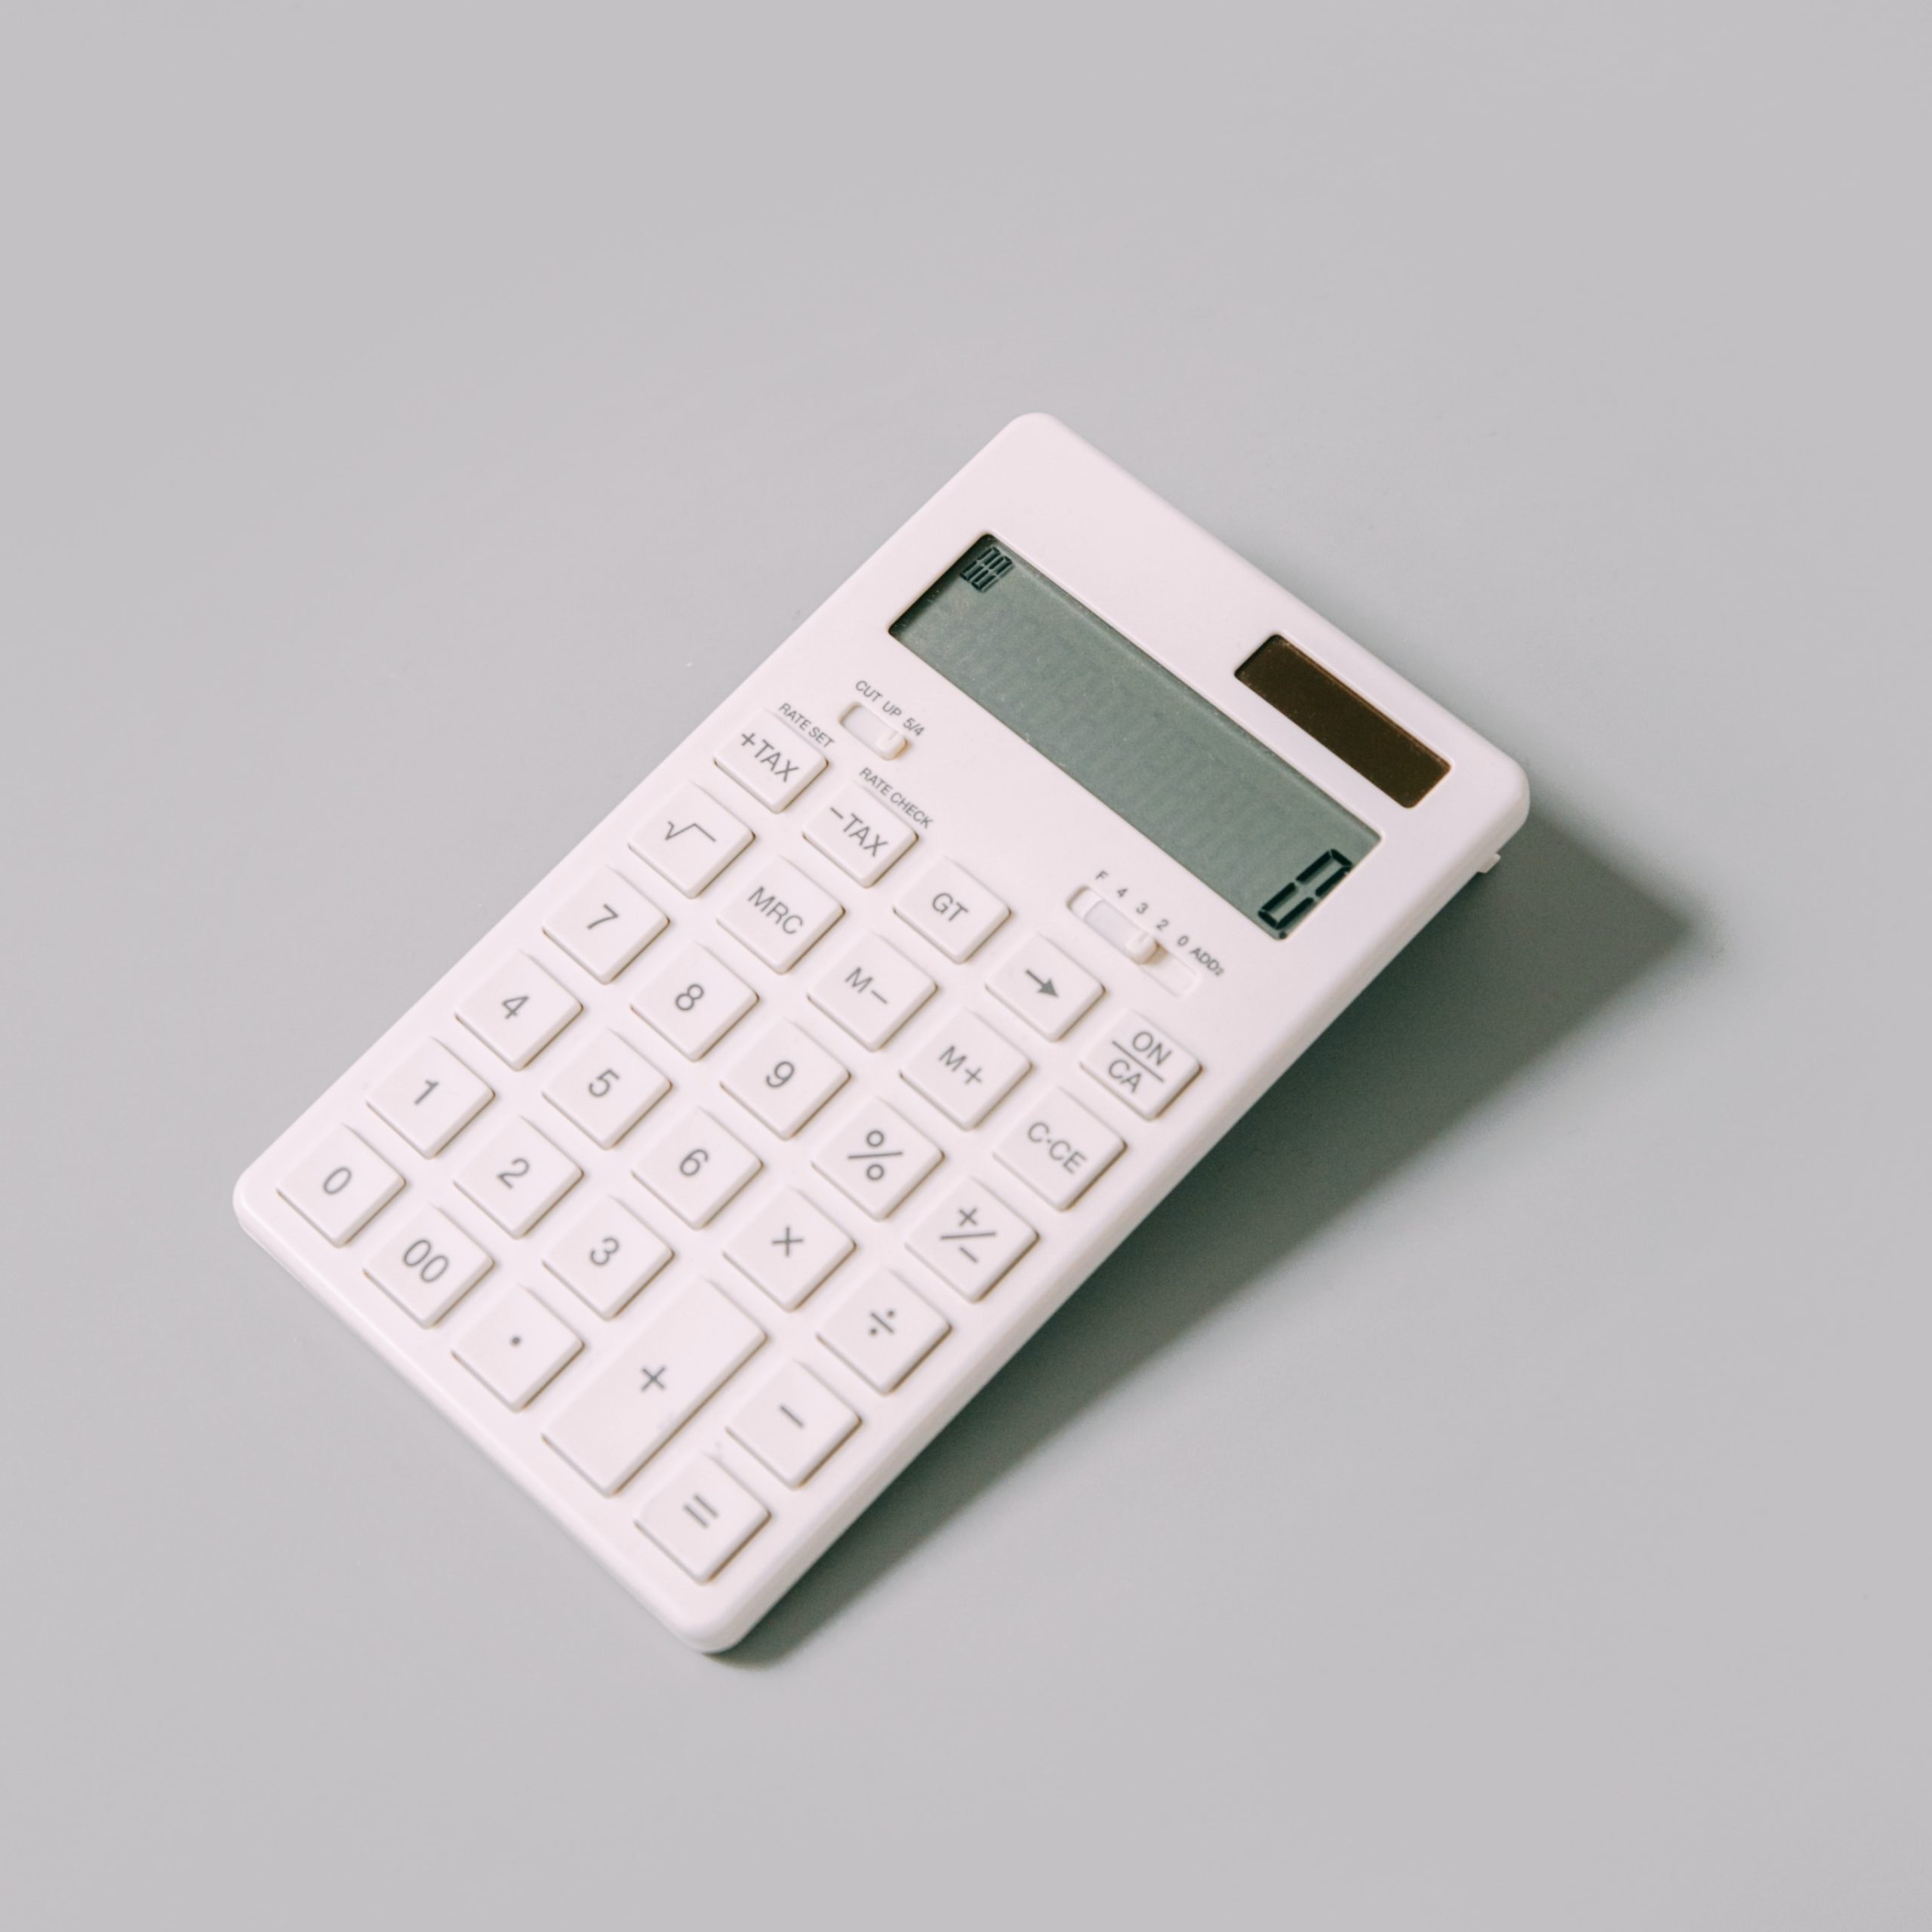 A white calculator on a grey background